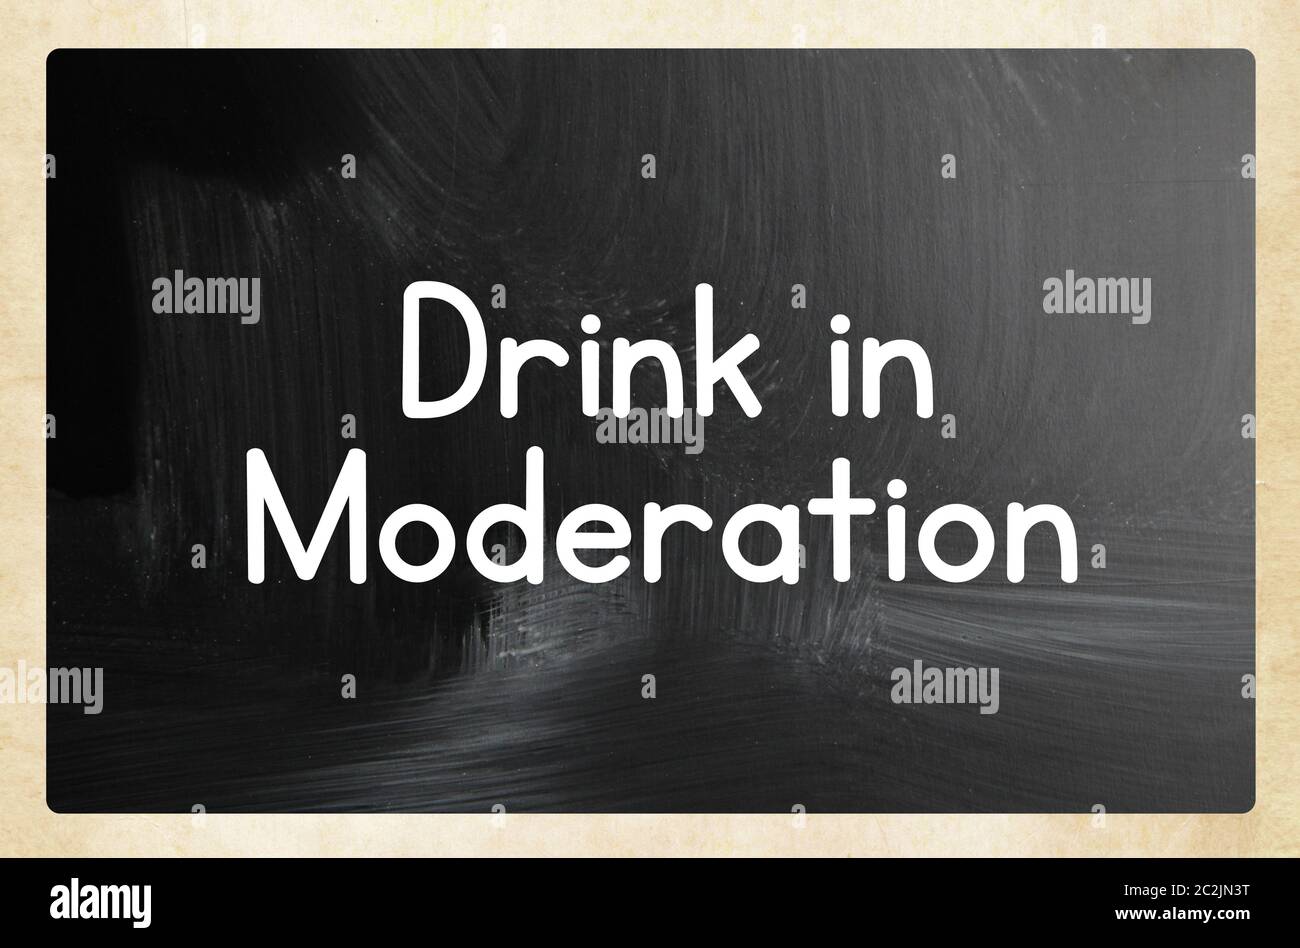 drink in moderation Stock Photo